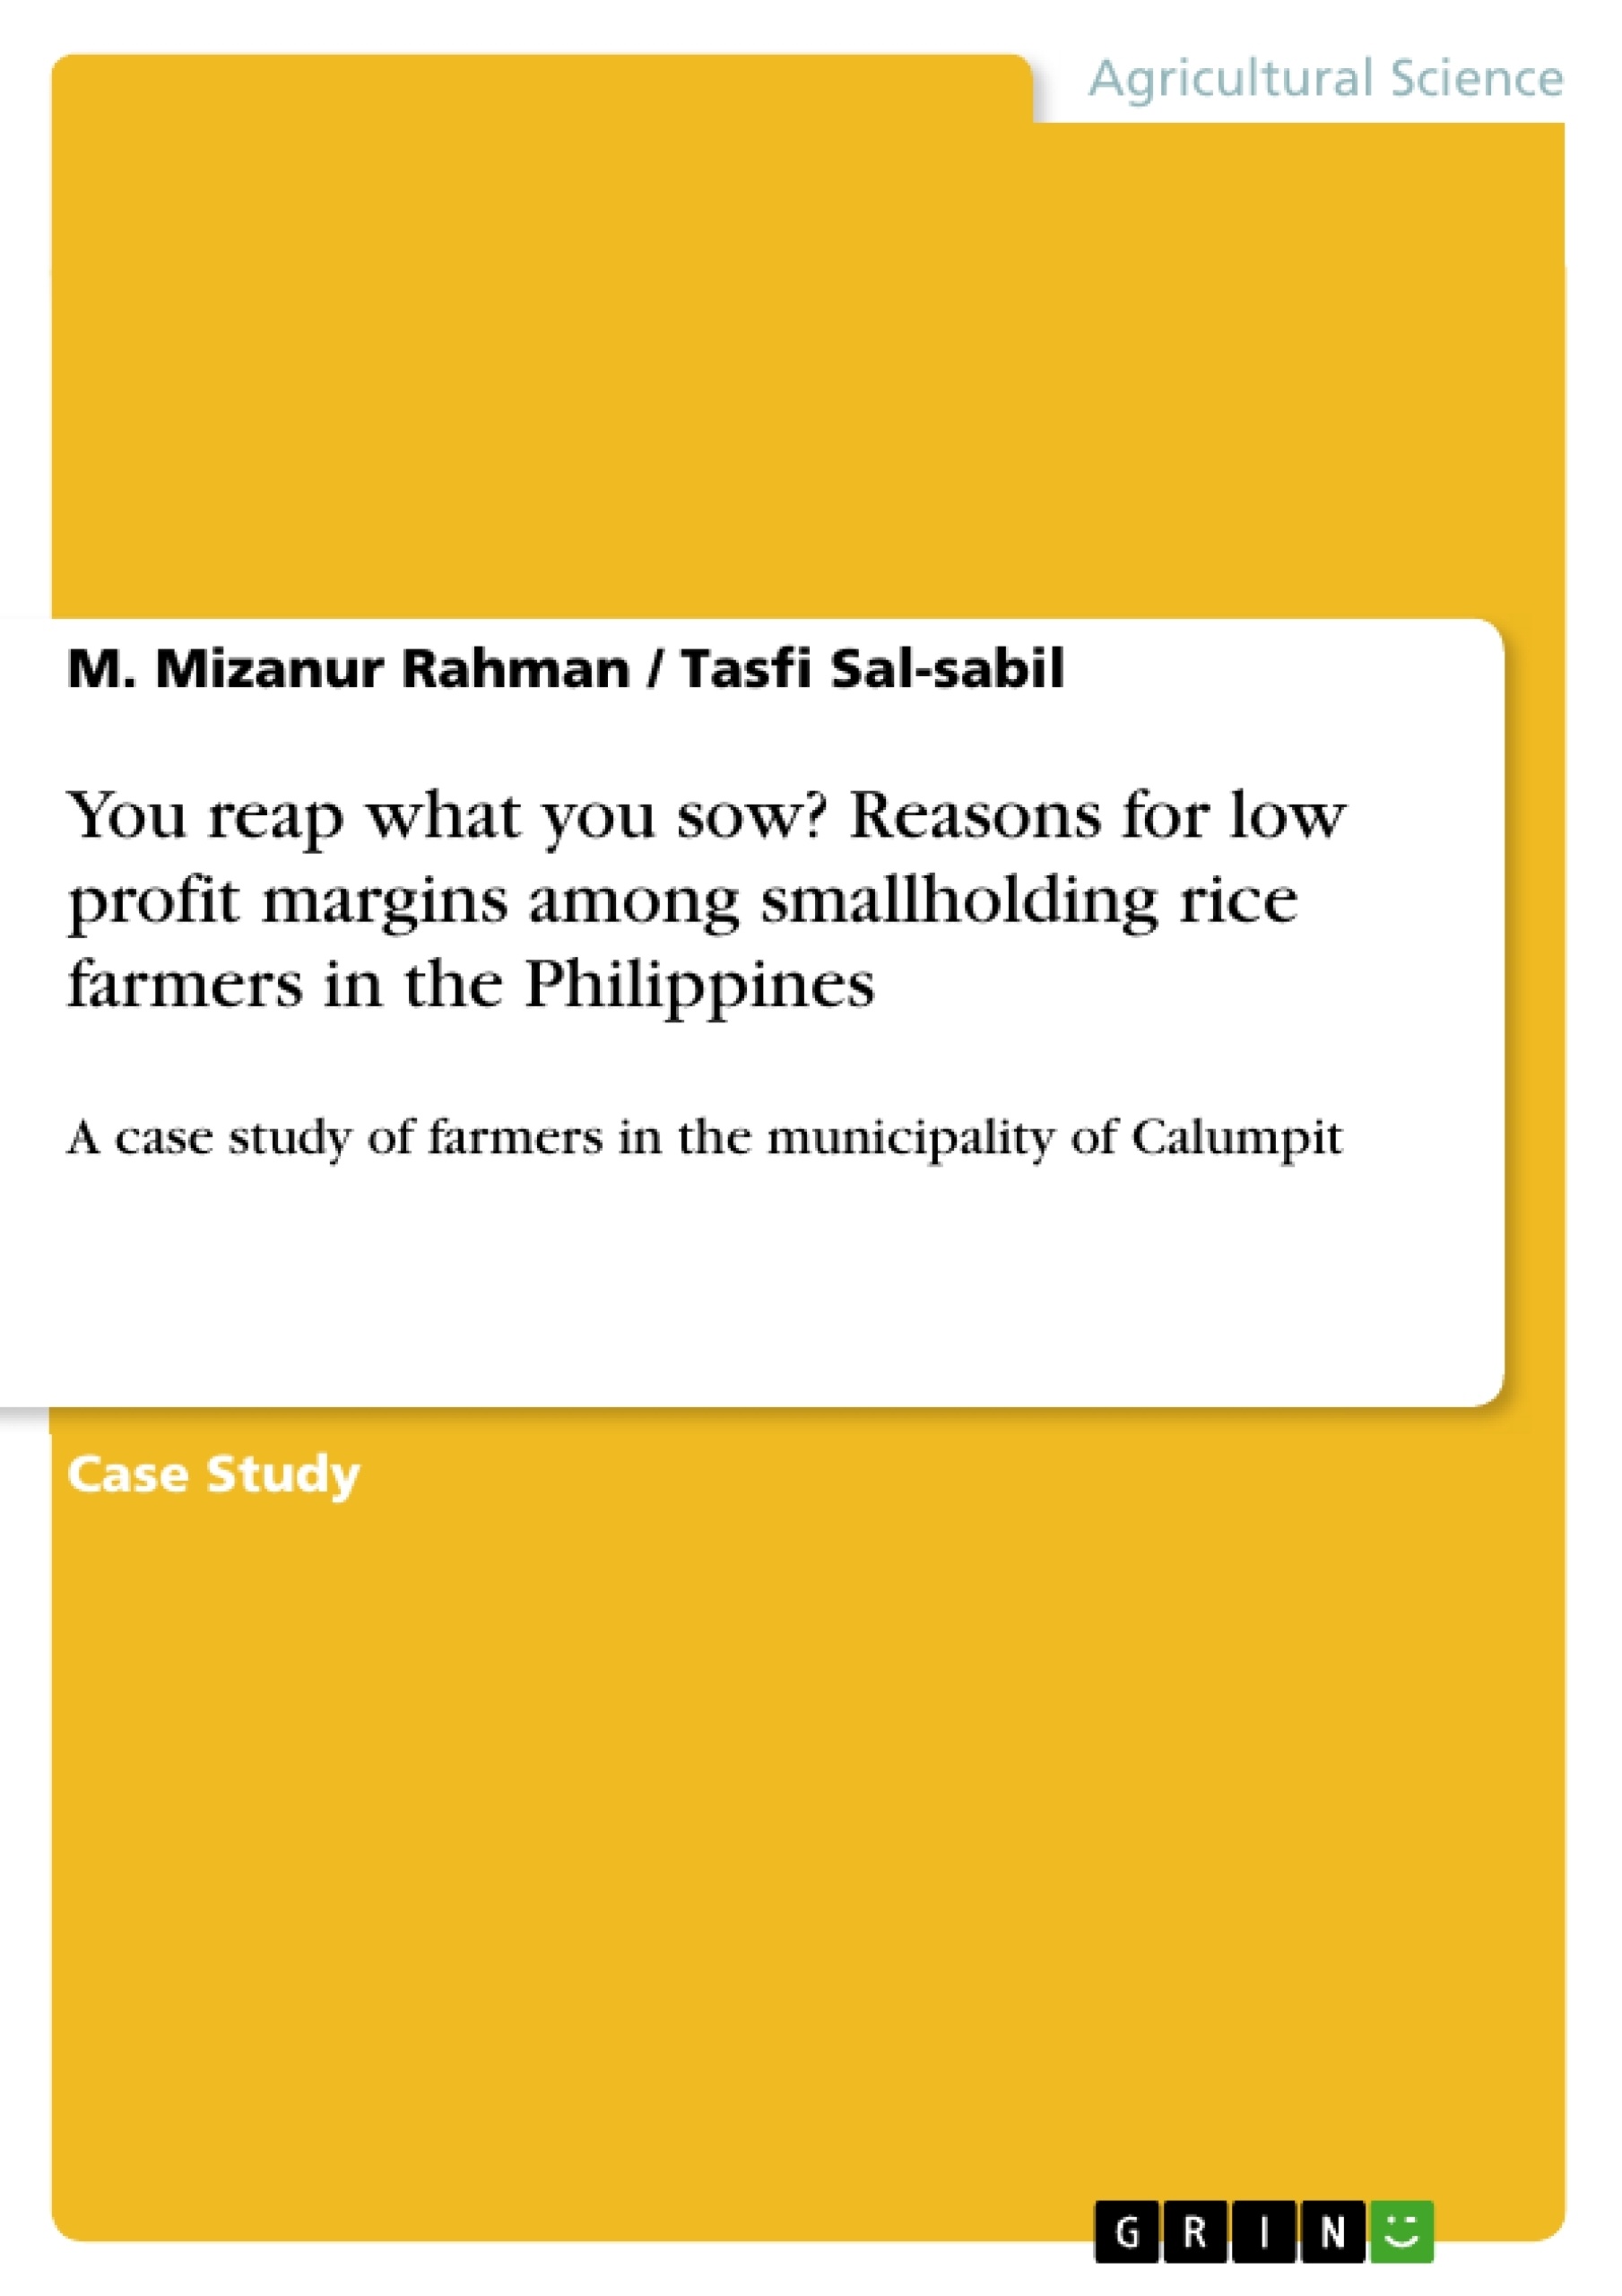 Title: You reap what you sow? Reasons for low profit margins among smallholding rice farmers in the Philippines